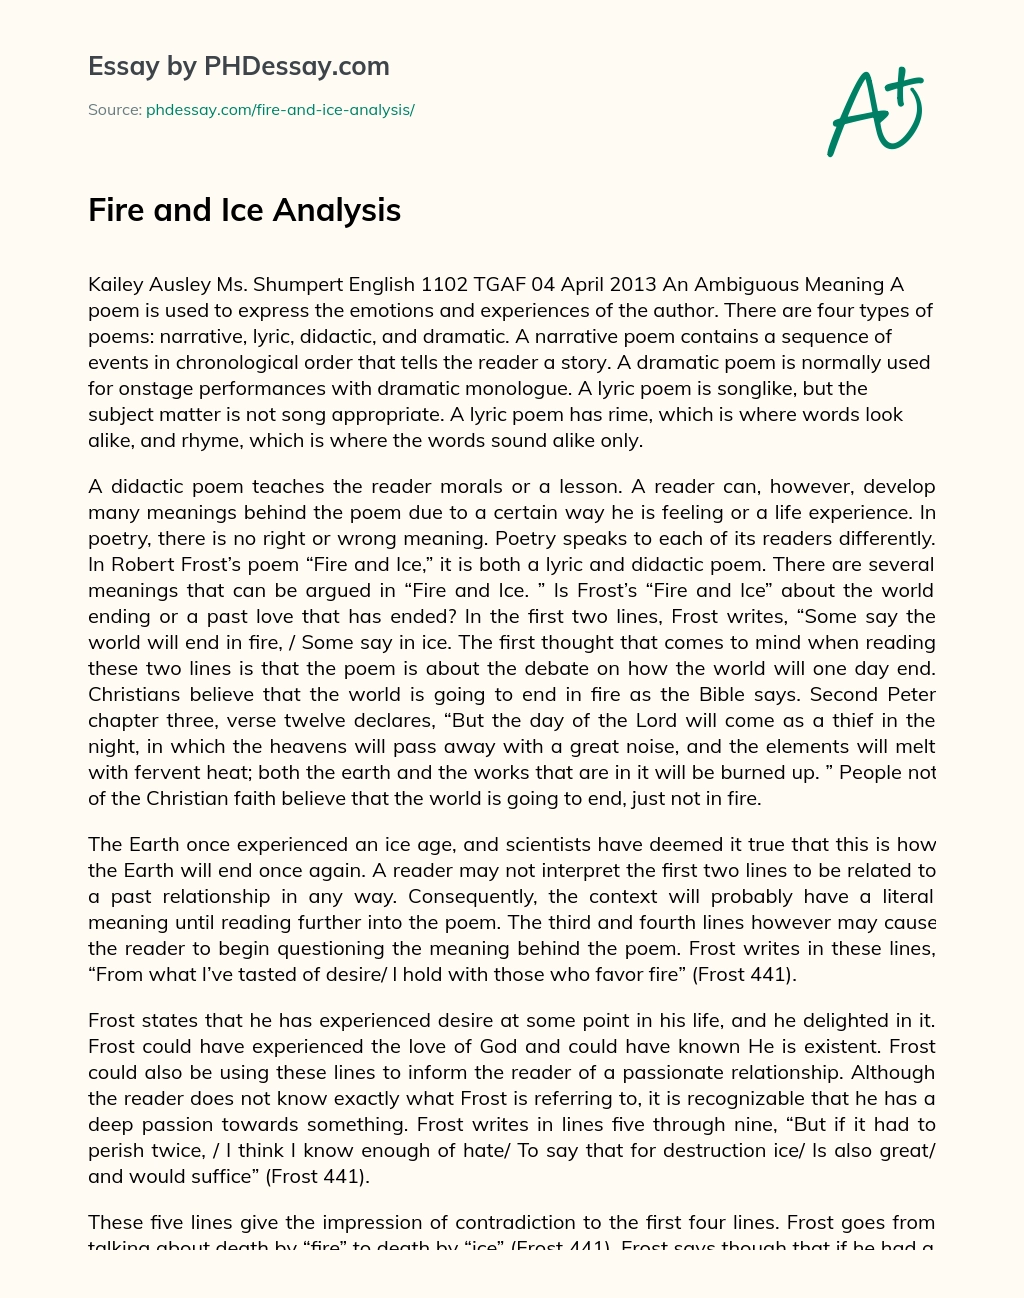 Fire and Ice Analysis essay